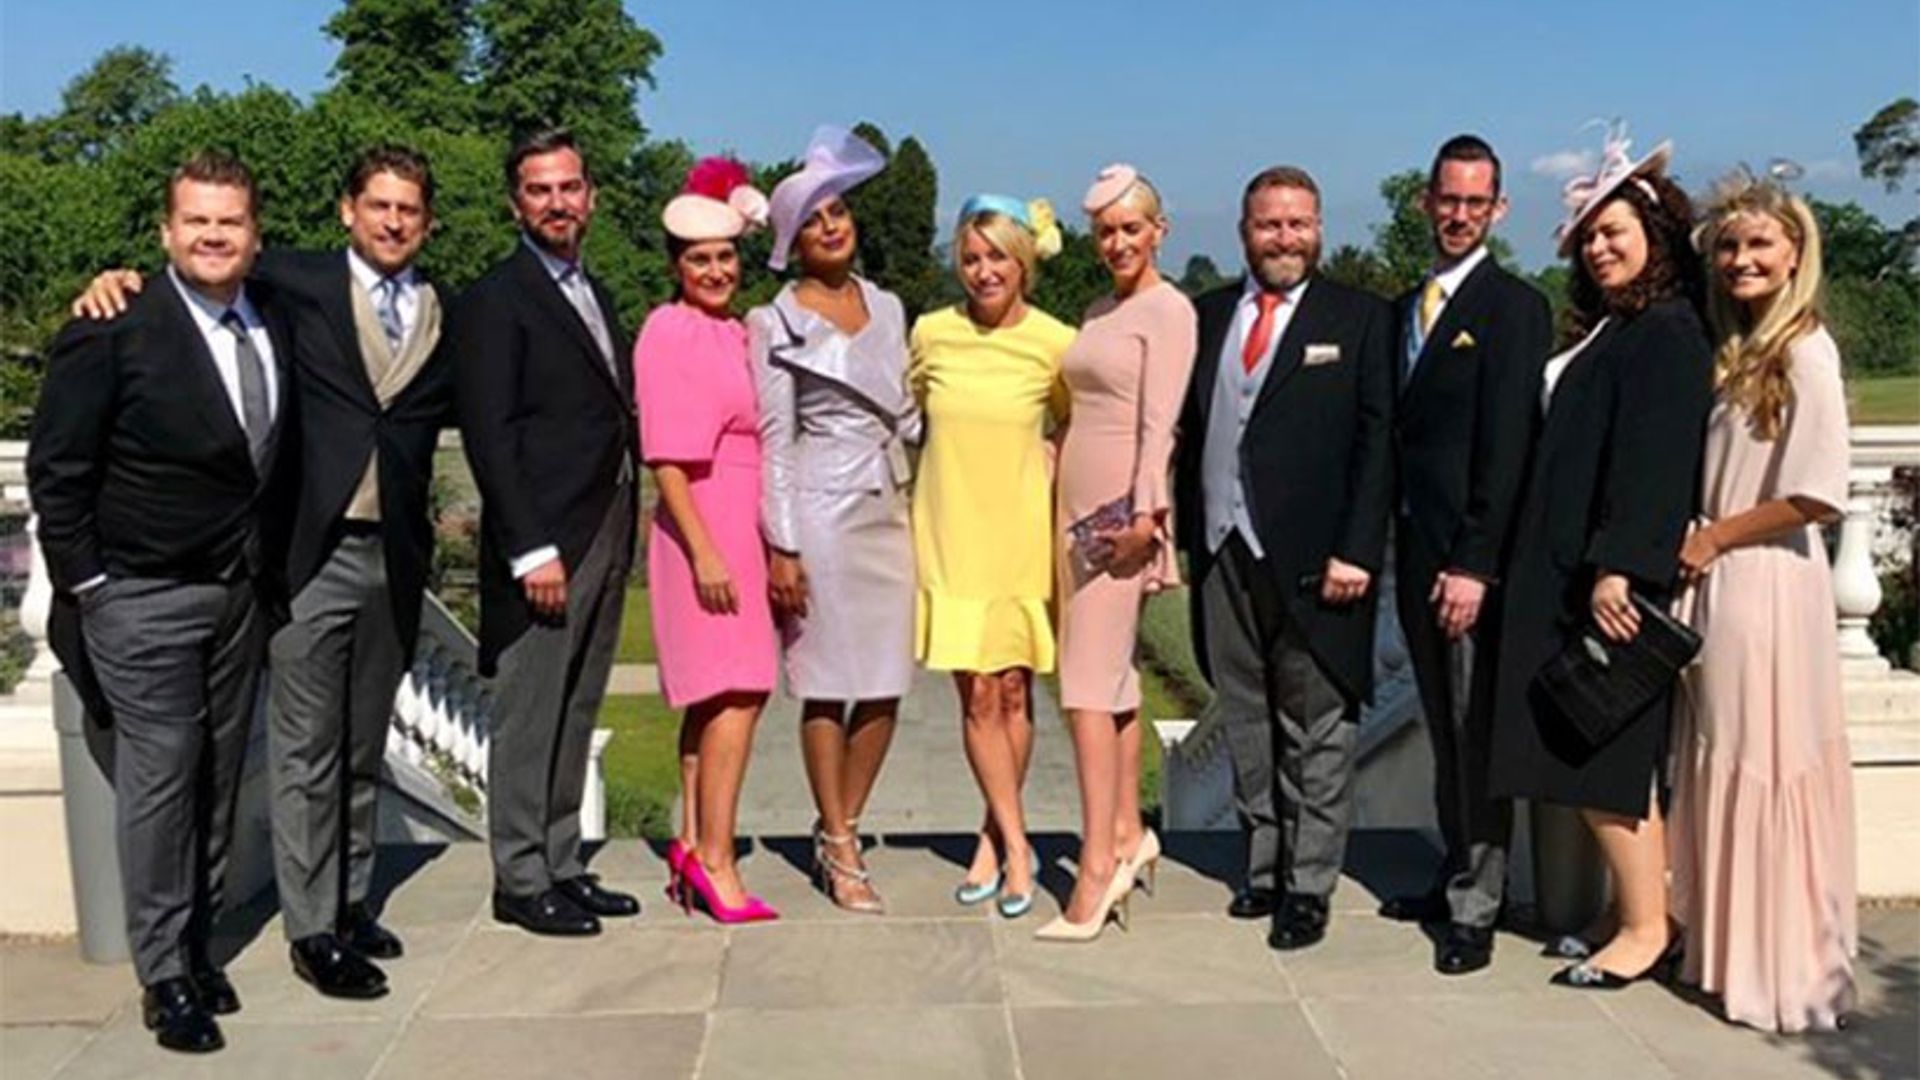 Priyanka Chopra shares 'bride squad' pictures from Meghan and Harry's wedding day